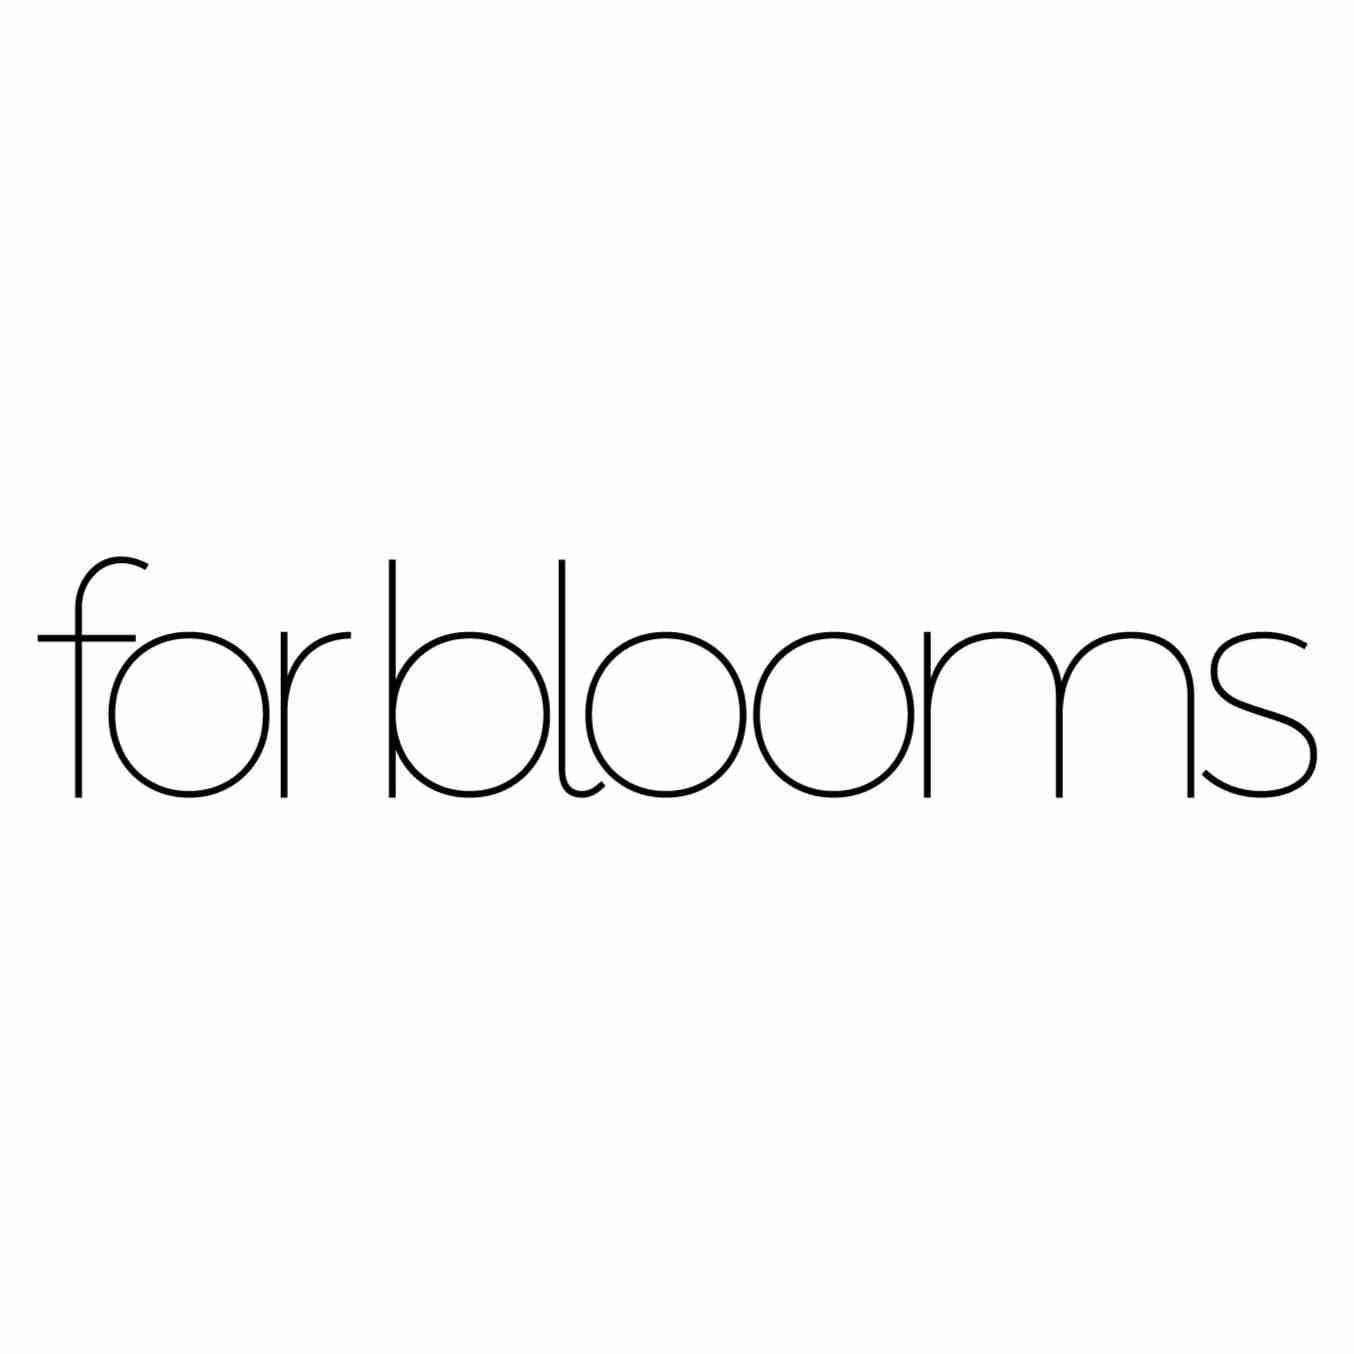 FOR BLOOMS